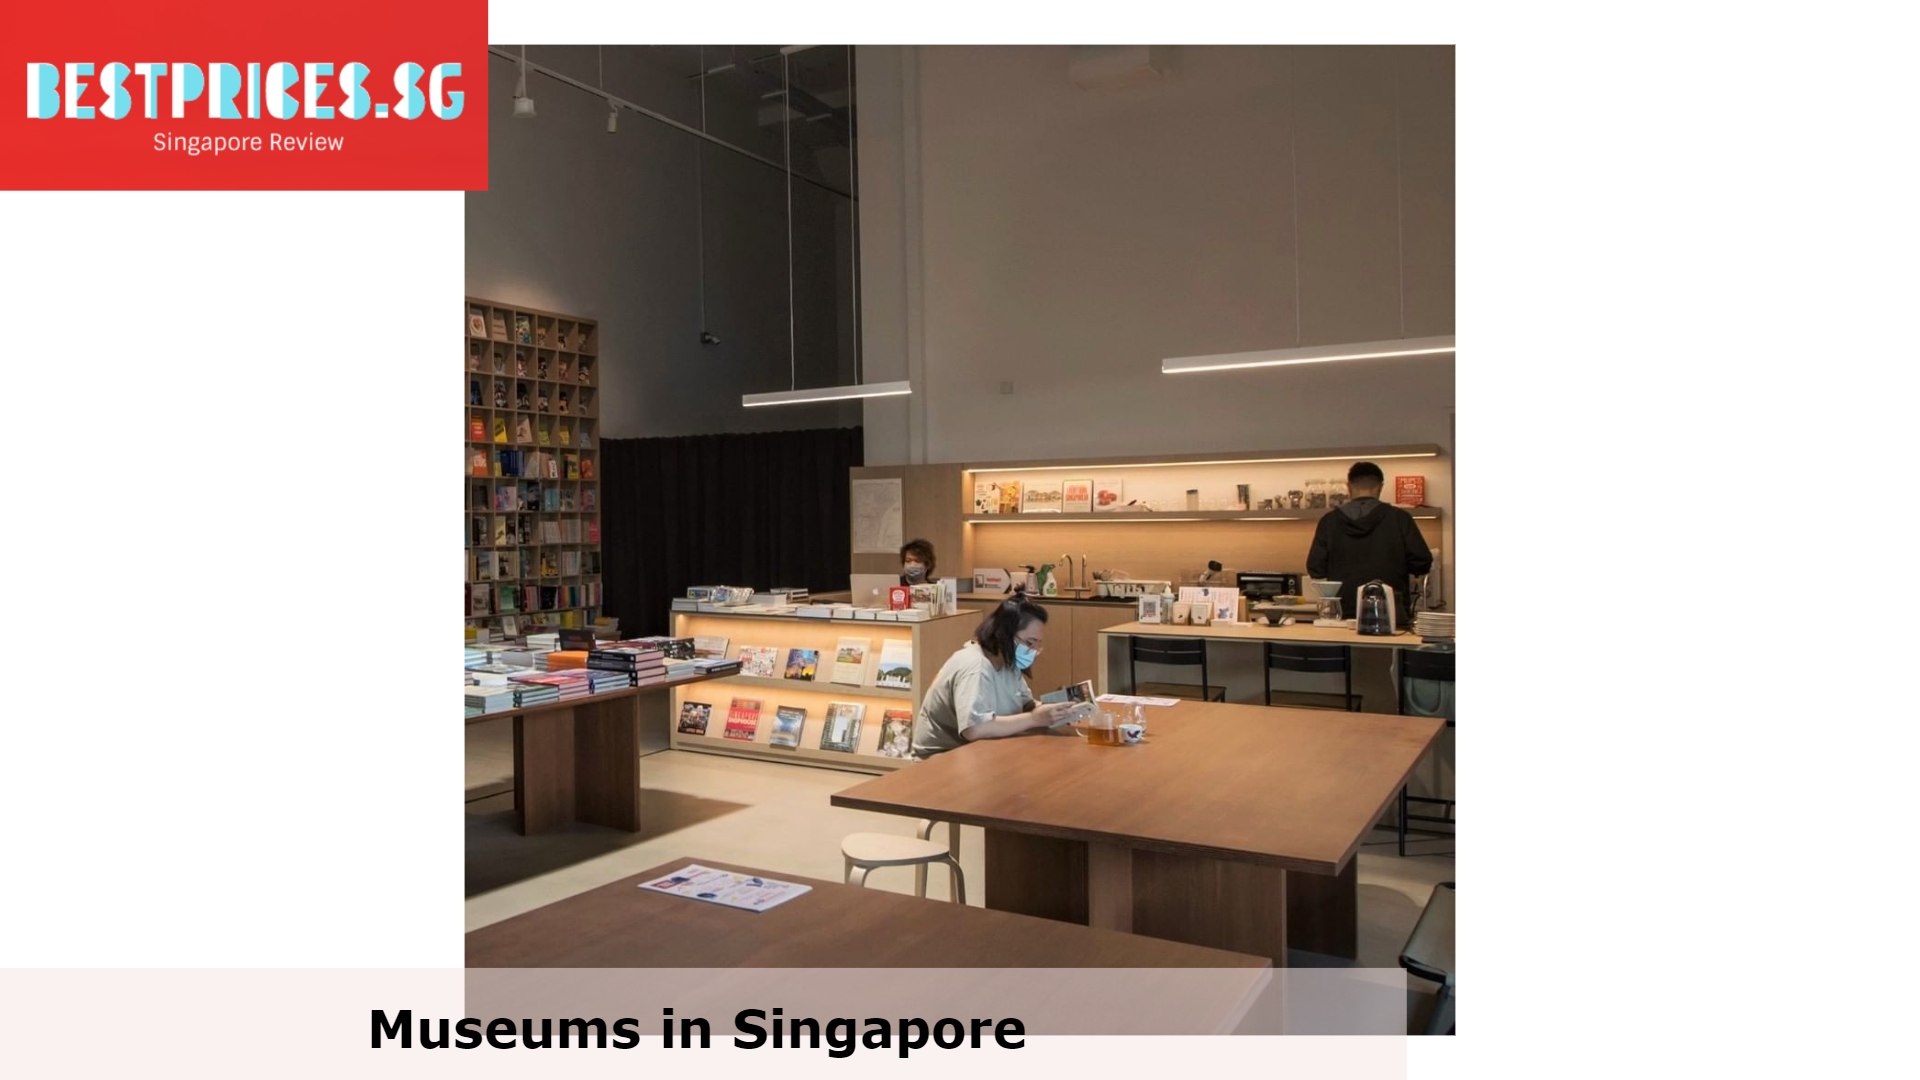 Singapore Art Museum - Museums in Singapore, Singapore Museums, museums in singapore, best museums to visit in Singapore, best museums art galleries in Singapore to explore, Which museums are free in Singapore?, Are there any museums in Singapore?, How much is a ticket to National Museum of Singapore?, Whats on in National Museum Singapore?, Which experiences are best for museums in Singapore?, What are the best places for museums in Singapore?, singapore art museum, parkview museum, art science museum singapore, museum exhibitions singapore, museums singapore free, museums singapore opening hours, 